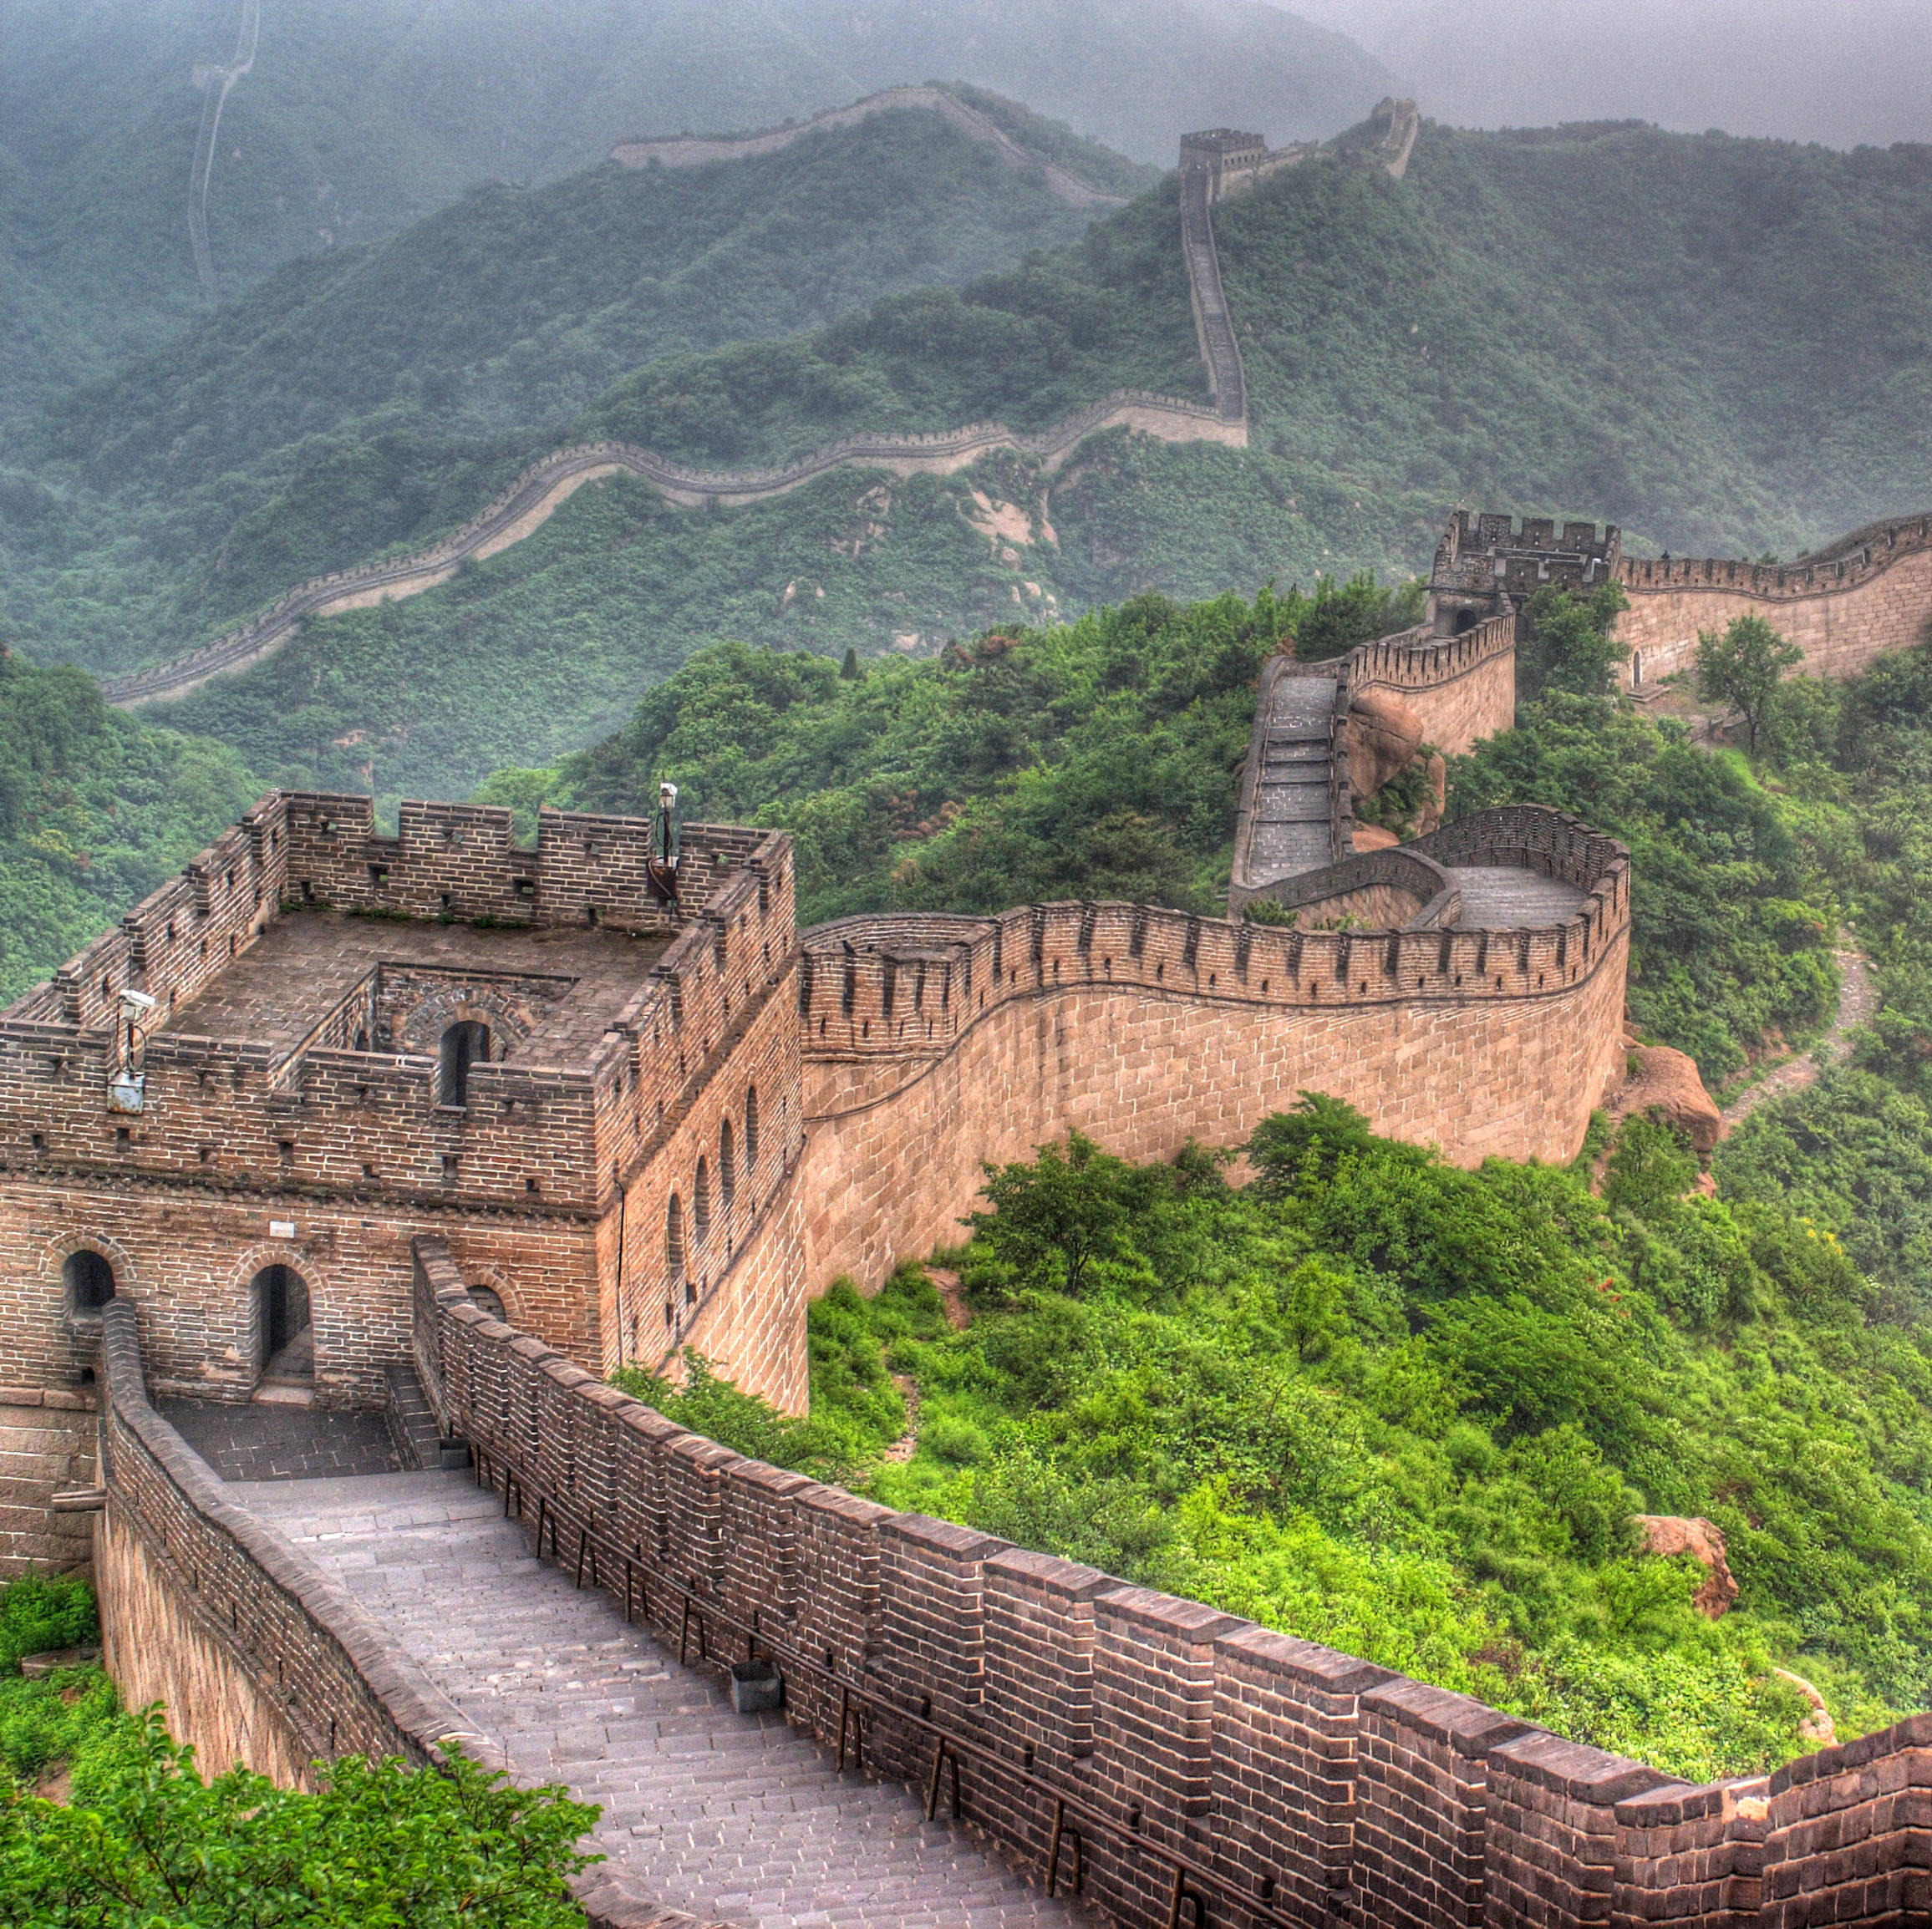 8-night Beijing, Xian & Shanghai guided tour with flights for $1,299